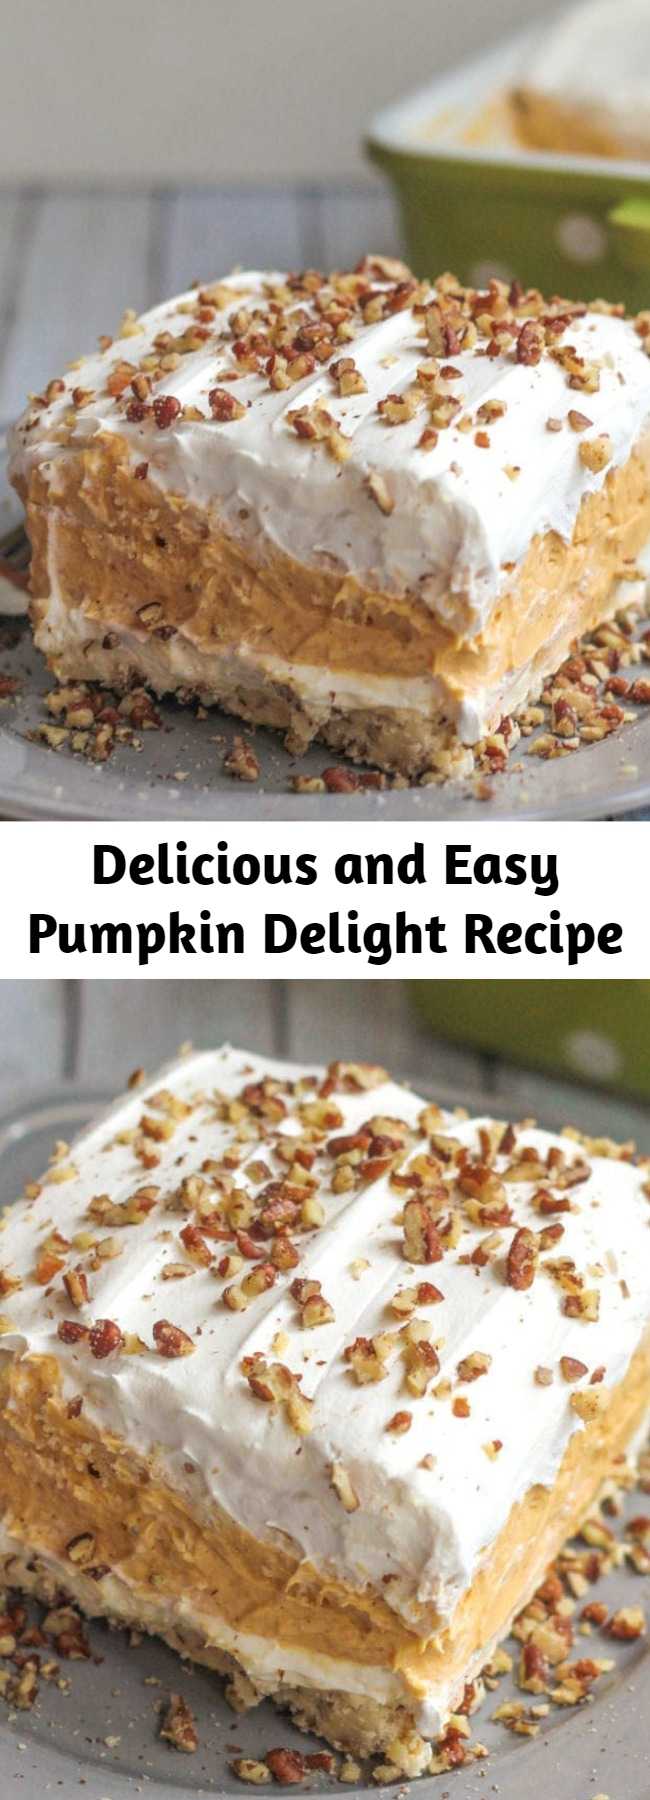 Delicious and Easy Pumpkin Delight Recipe - With A Buttery Pecan Crust, A Whipped Cream Cheese Layer, Light And Fluffy Pumpkin Spice Pudding, And More Whipped Cream Topped Off With Chopped Pecans, This Pumpkin Delight Dessert Is Absolutely Irresistible! They all make great Thanksgiving desserts.